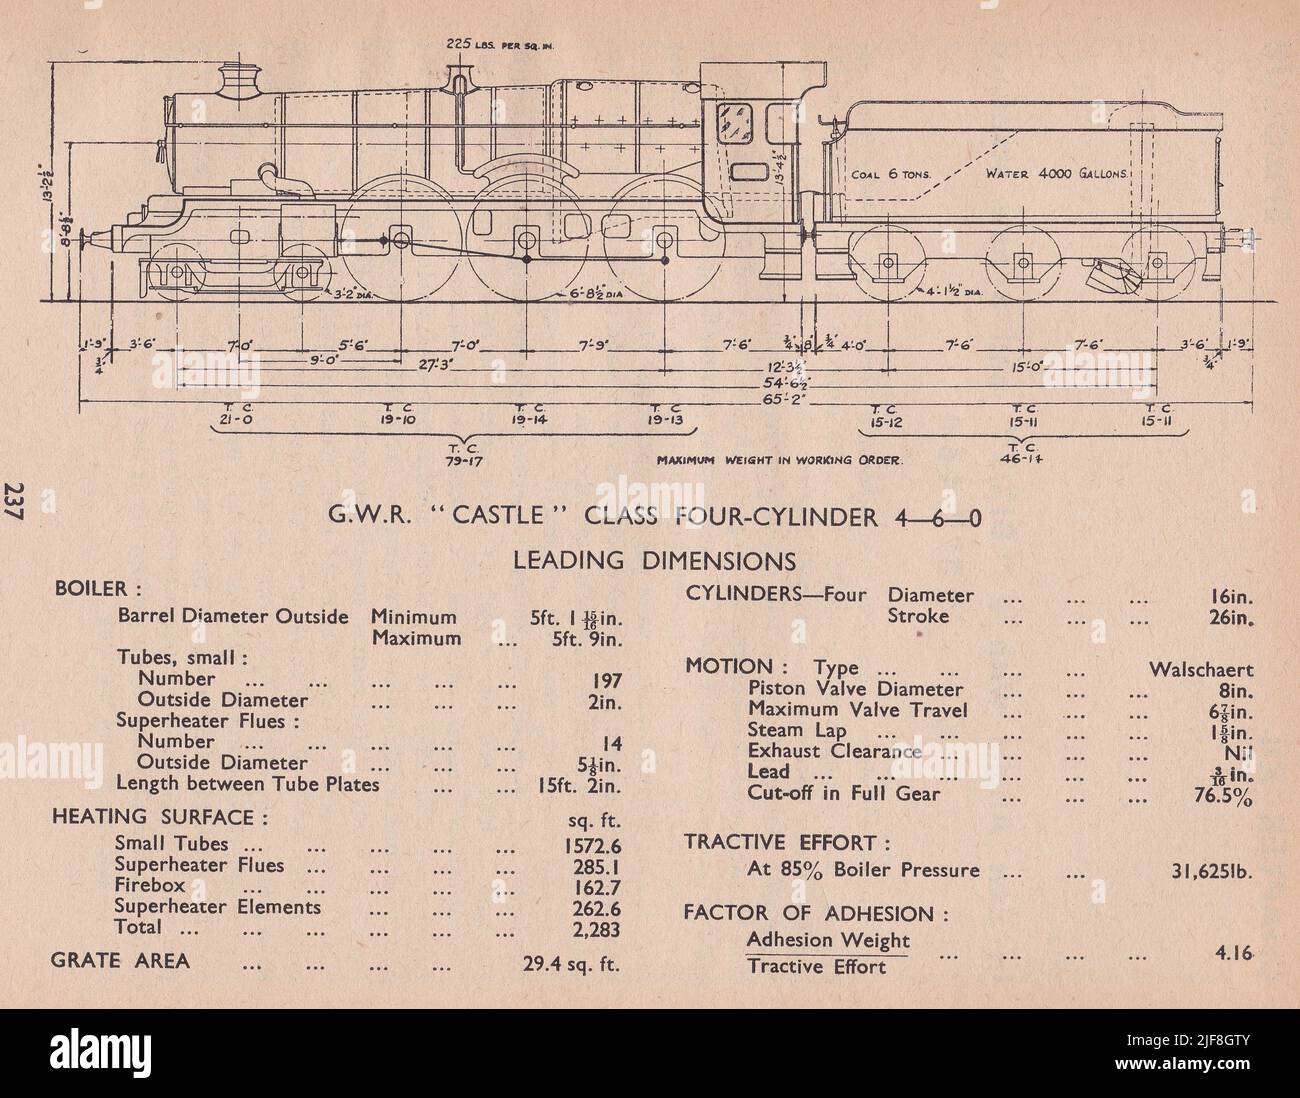 Vintage diagram of a G.W.R. Castle Class Four-Cylinder 4-6-0 Leading Dimensions. Stock Photo